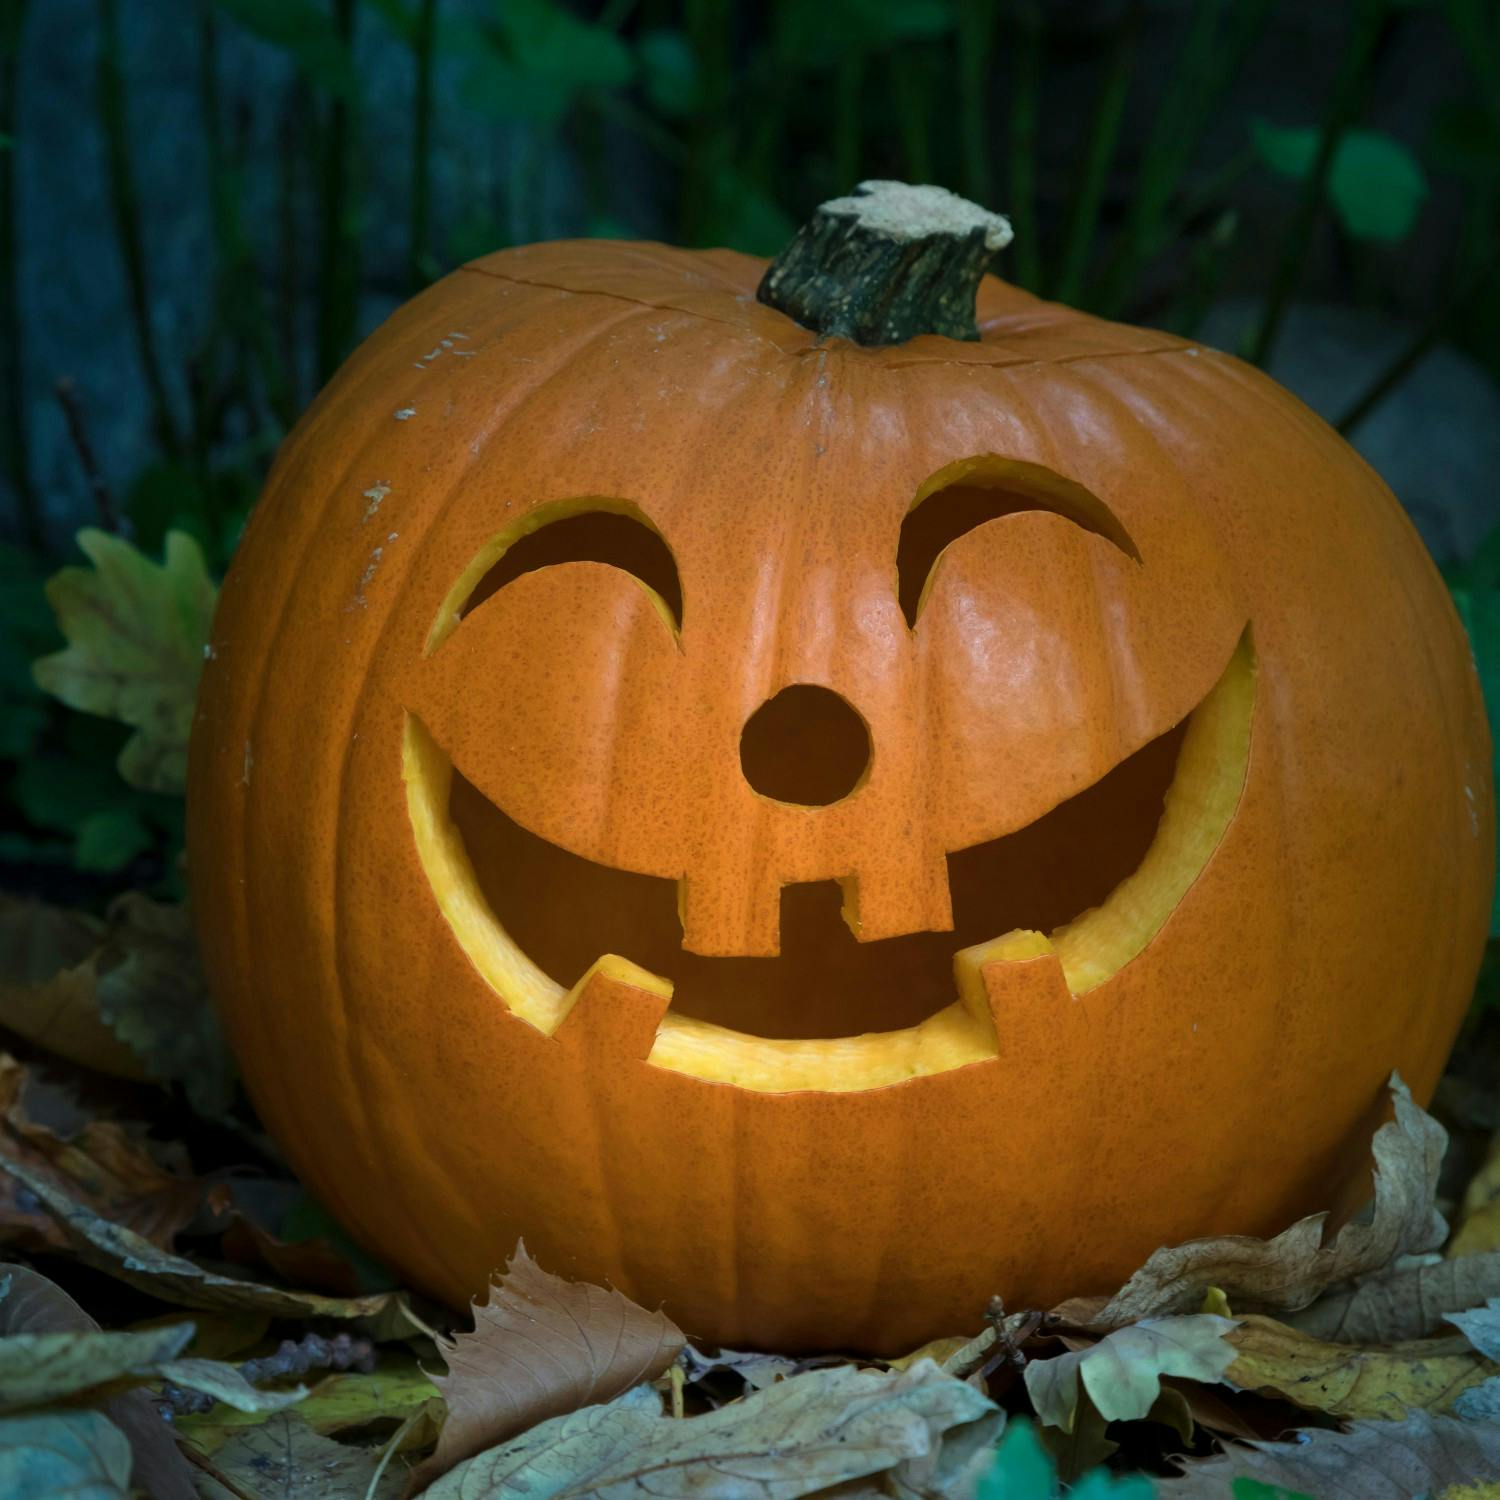 Get your Garden & Home ready for Halloween